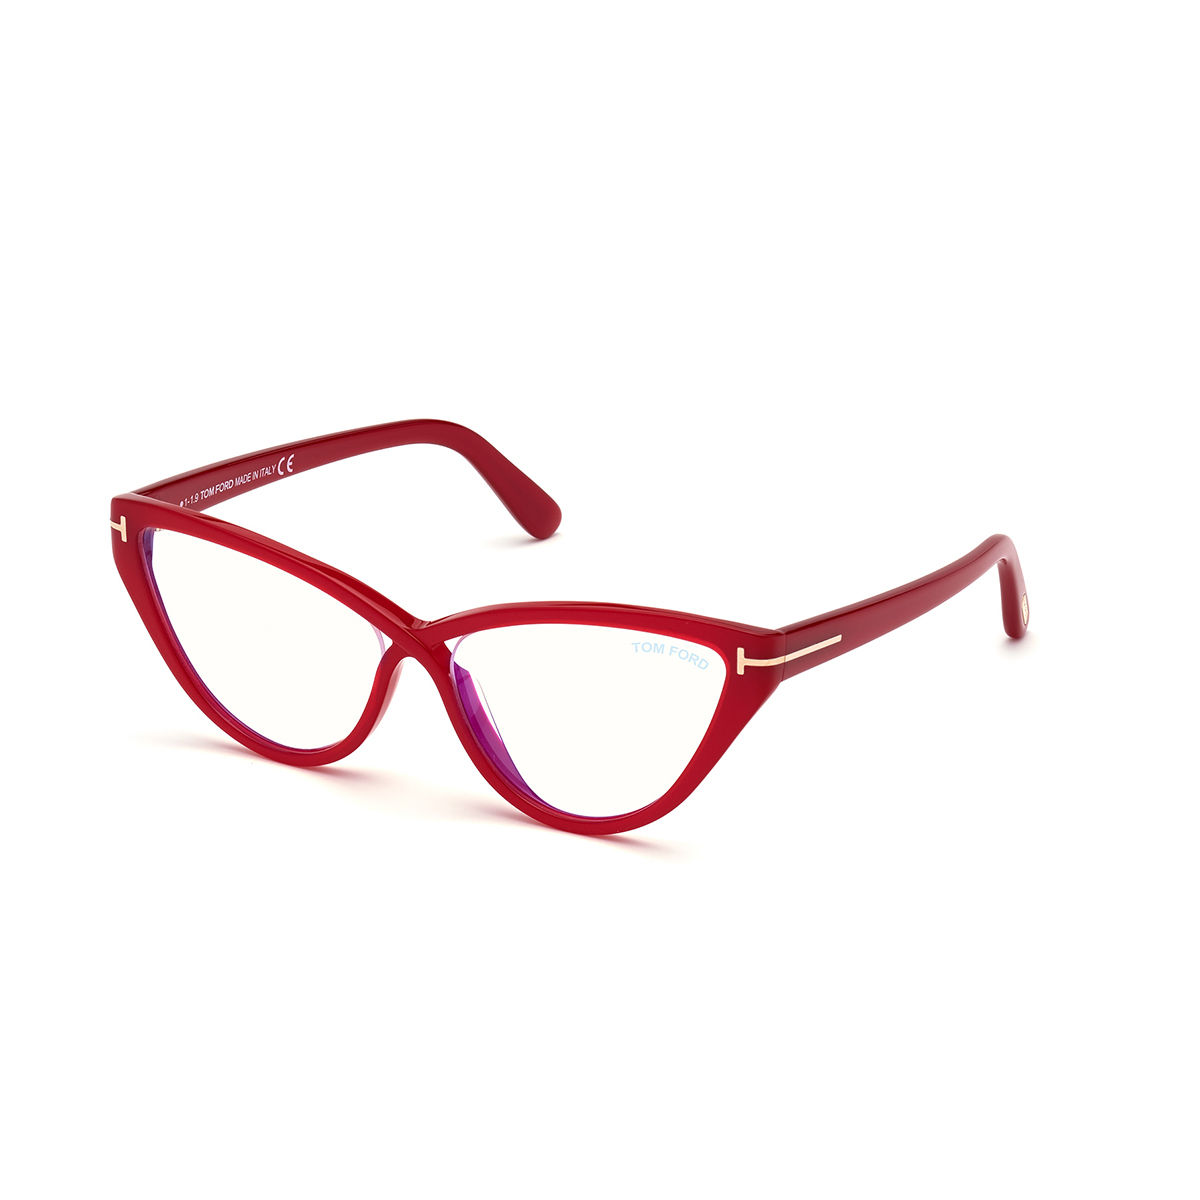 Tom Ford Sunglasses Red Plastic Eyeglasses FT5729-B 56 075: Buy Tom Ford  Sunglasses Red Plastic Eyeglasses FT5729-B 56 075 Online at Best Price in  India | Nykaa